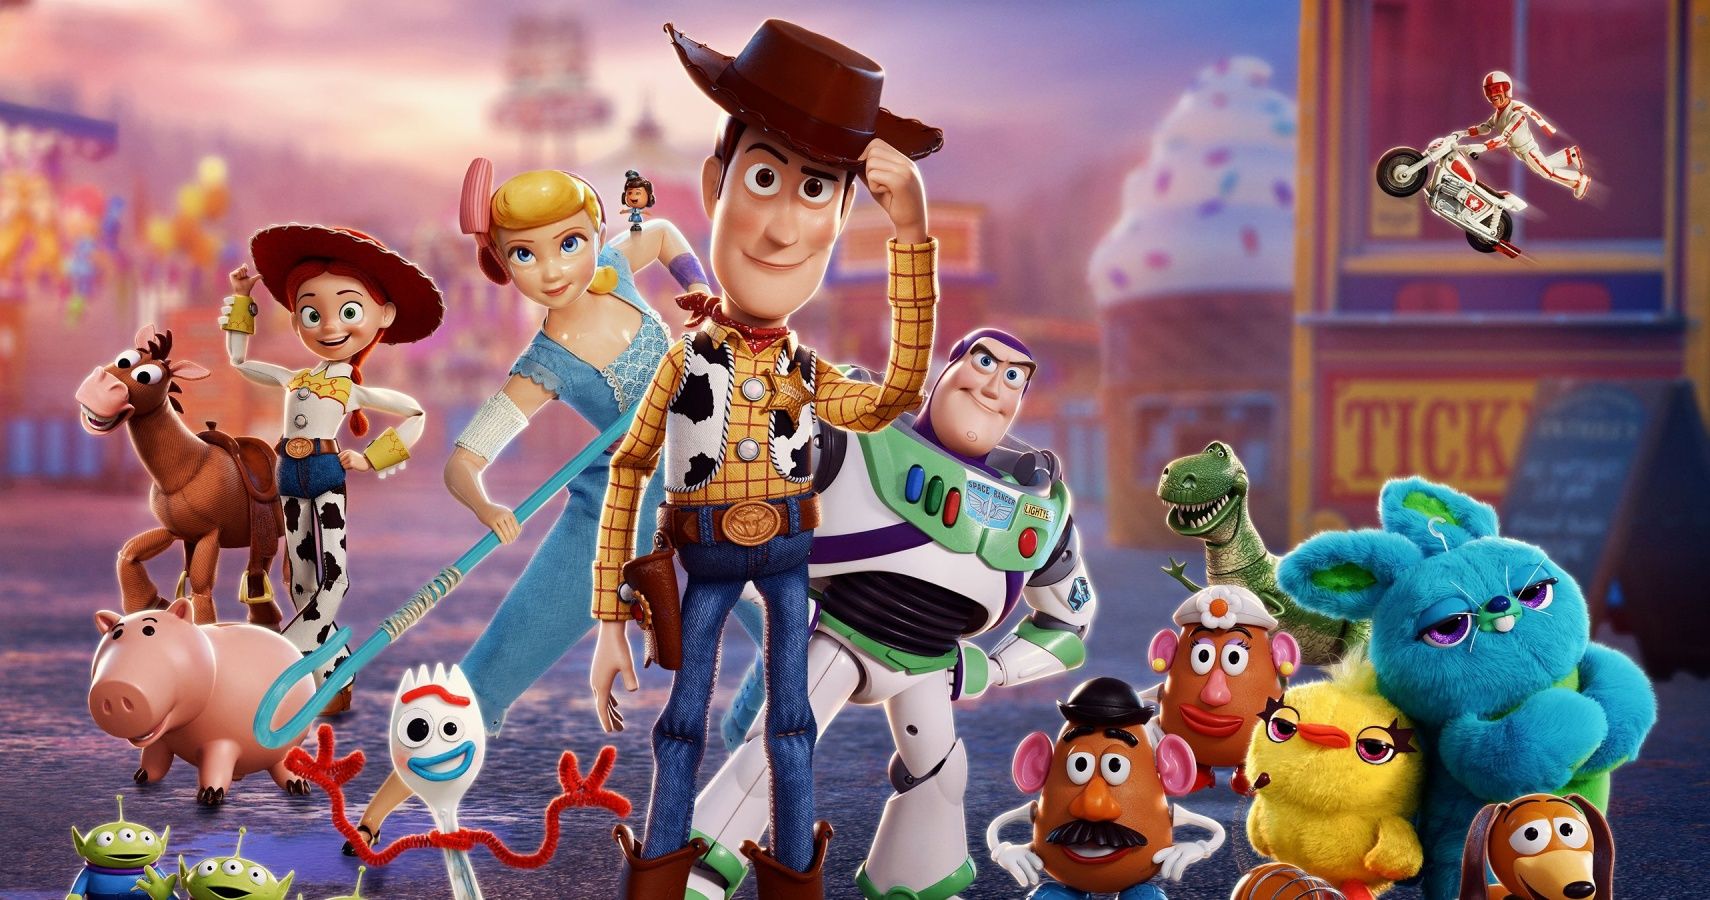 Toy Story Which Character Are You Based On Your Chinese Zodiac